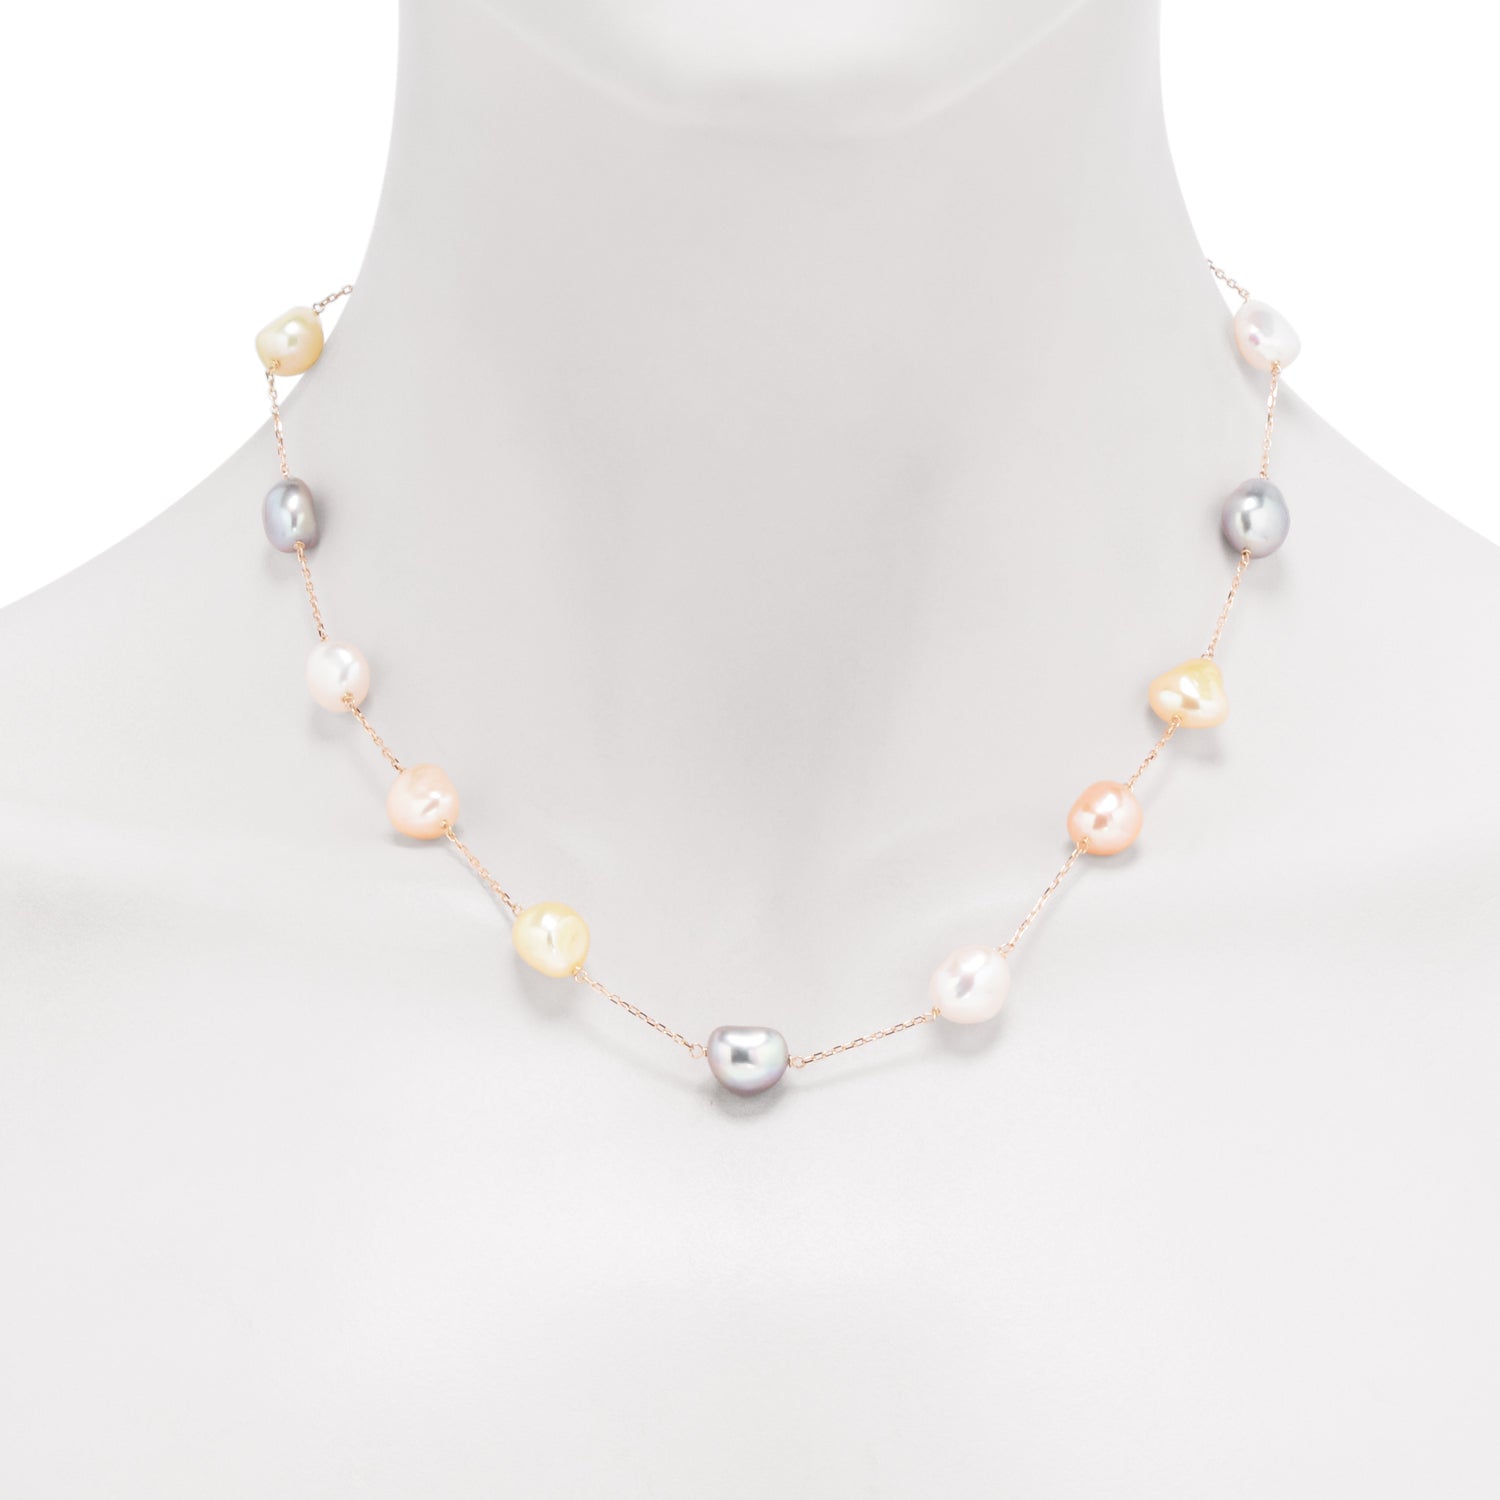 Cultured Freshwater Multi Color Pearl Necklace in 14kt Yellow Gold (8.5-9.5mm pearls)